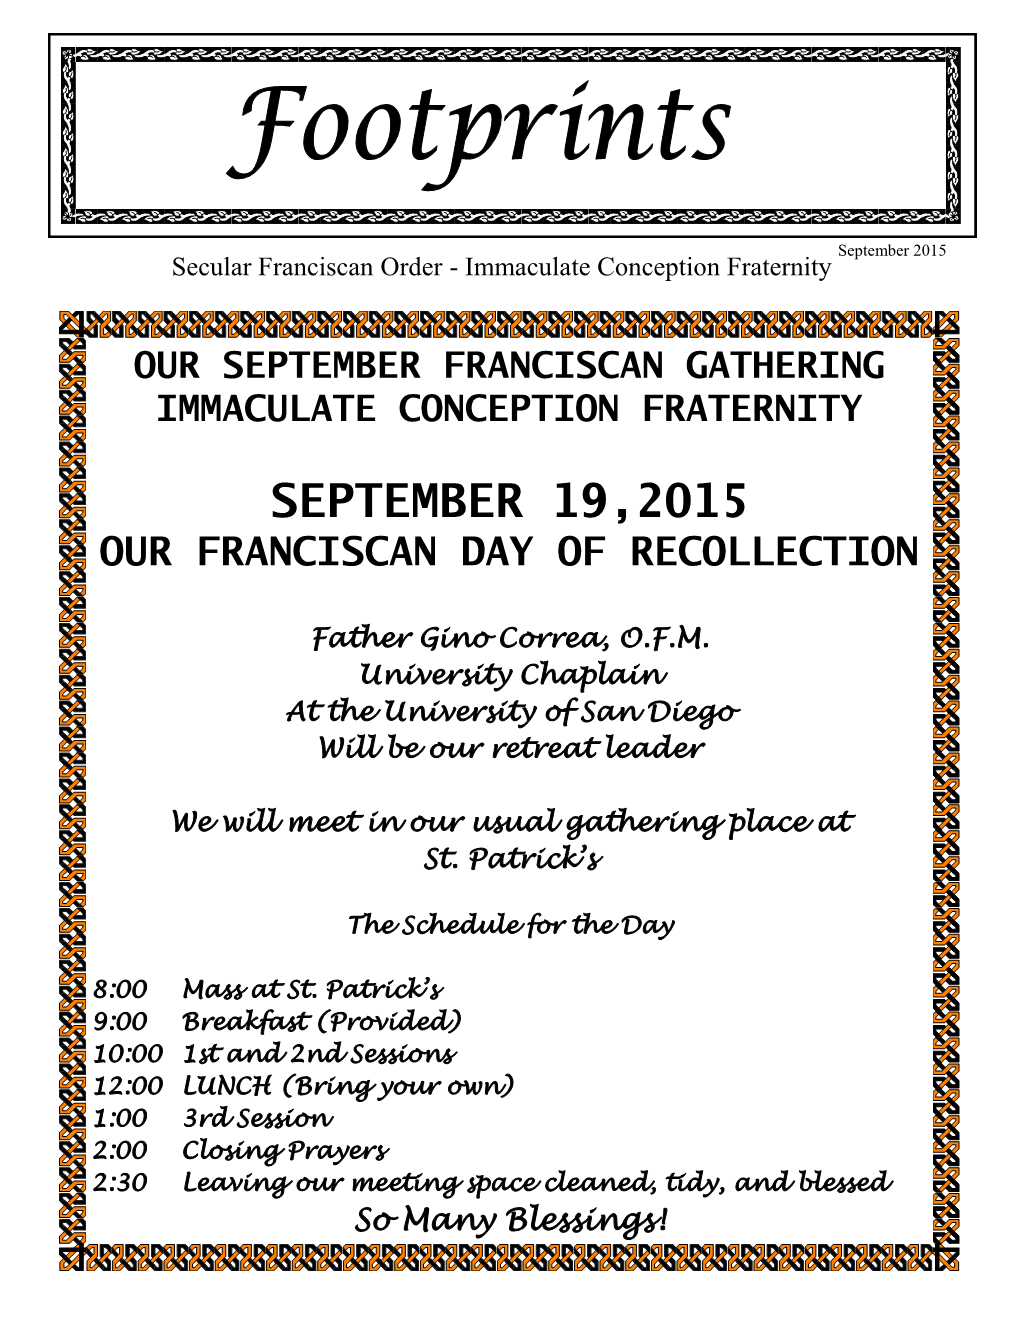 September 19,2015 Our Franciscan Day of Recollection